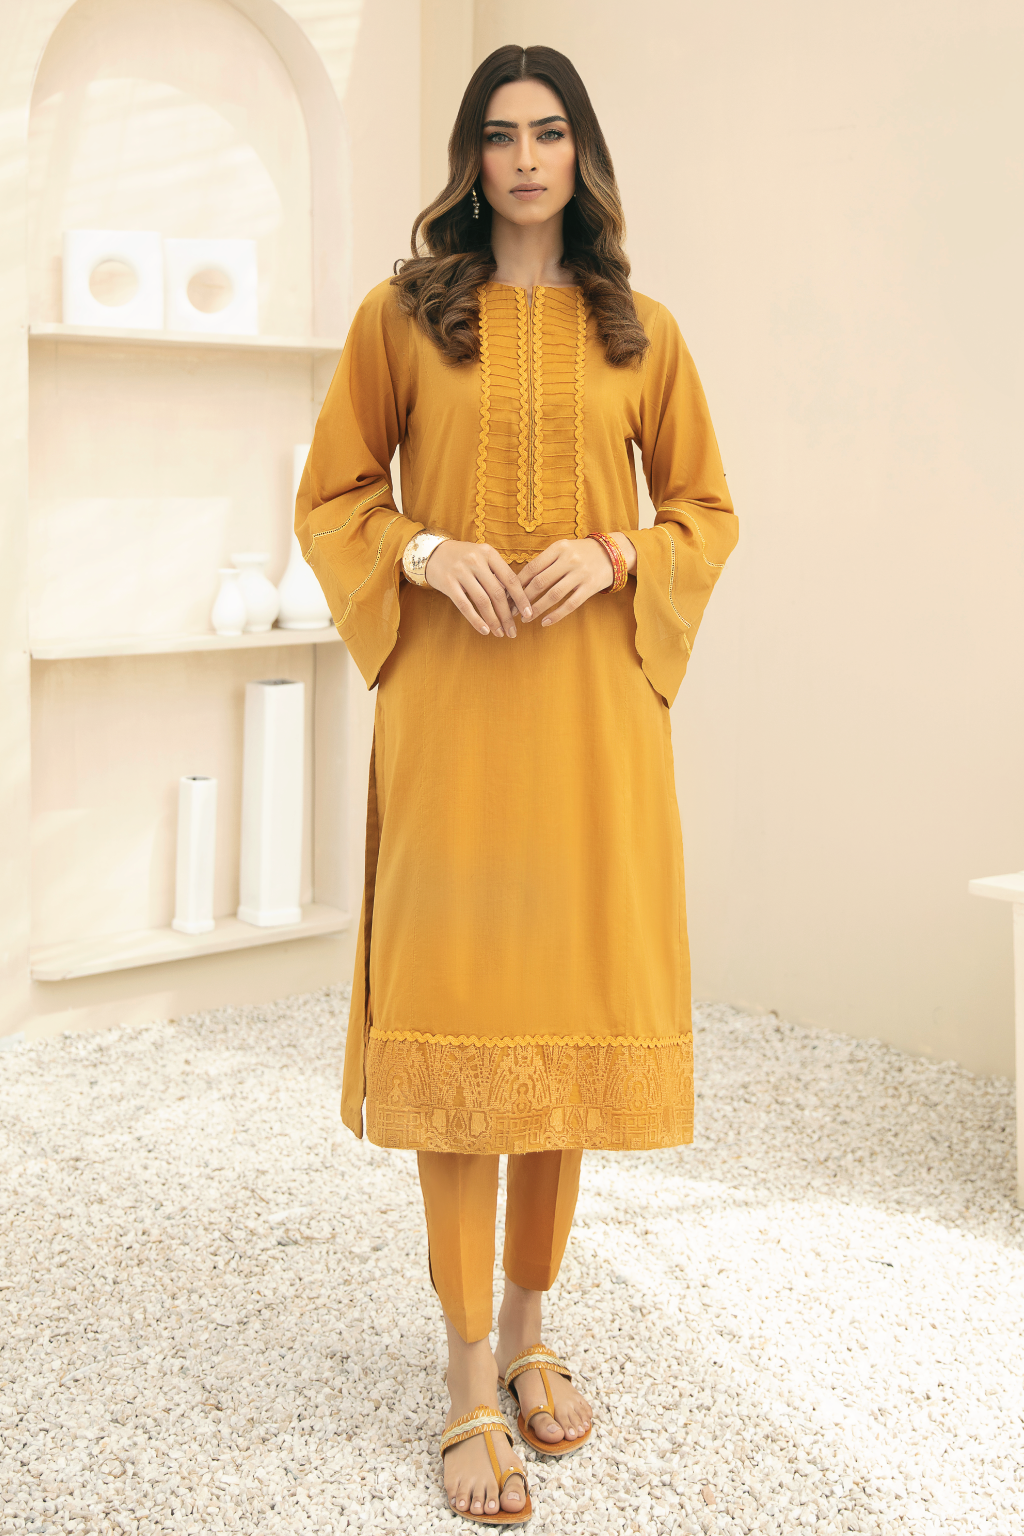 Iznik Pret Wear 2021 | GLAZED FIRE Mustard 1 piece lawn dress is most popular for Eid dress and summer outfits. We have wide range of stitched and Readymade dresses of Iznik lawn 2021, Iznik pret '21. This Eid get yourself elegant and classy outfit of Iznik in USA, UK, France, Spain from Lebaasonline at SALE price!